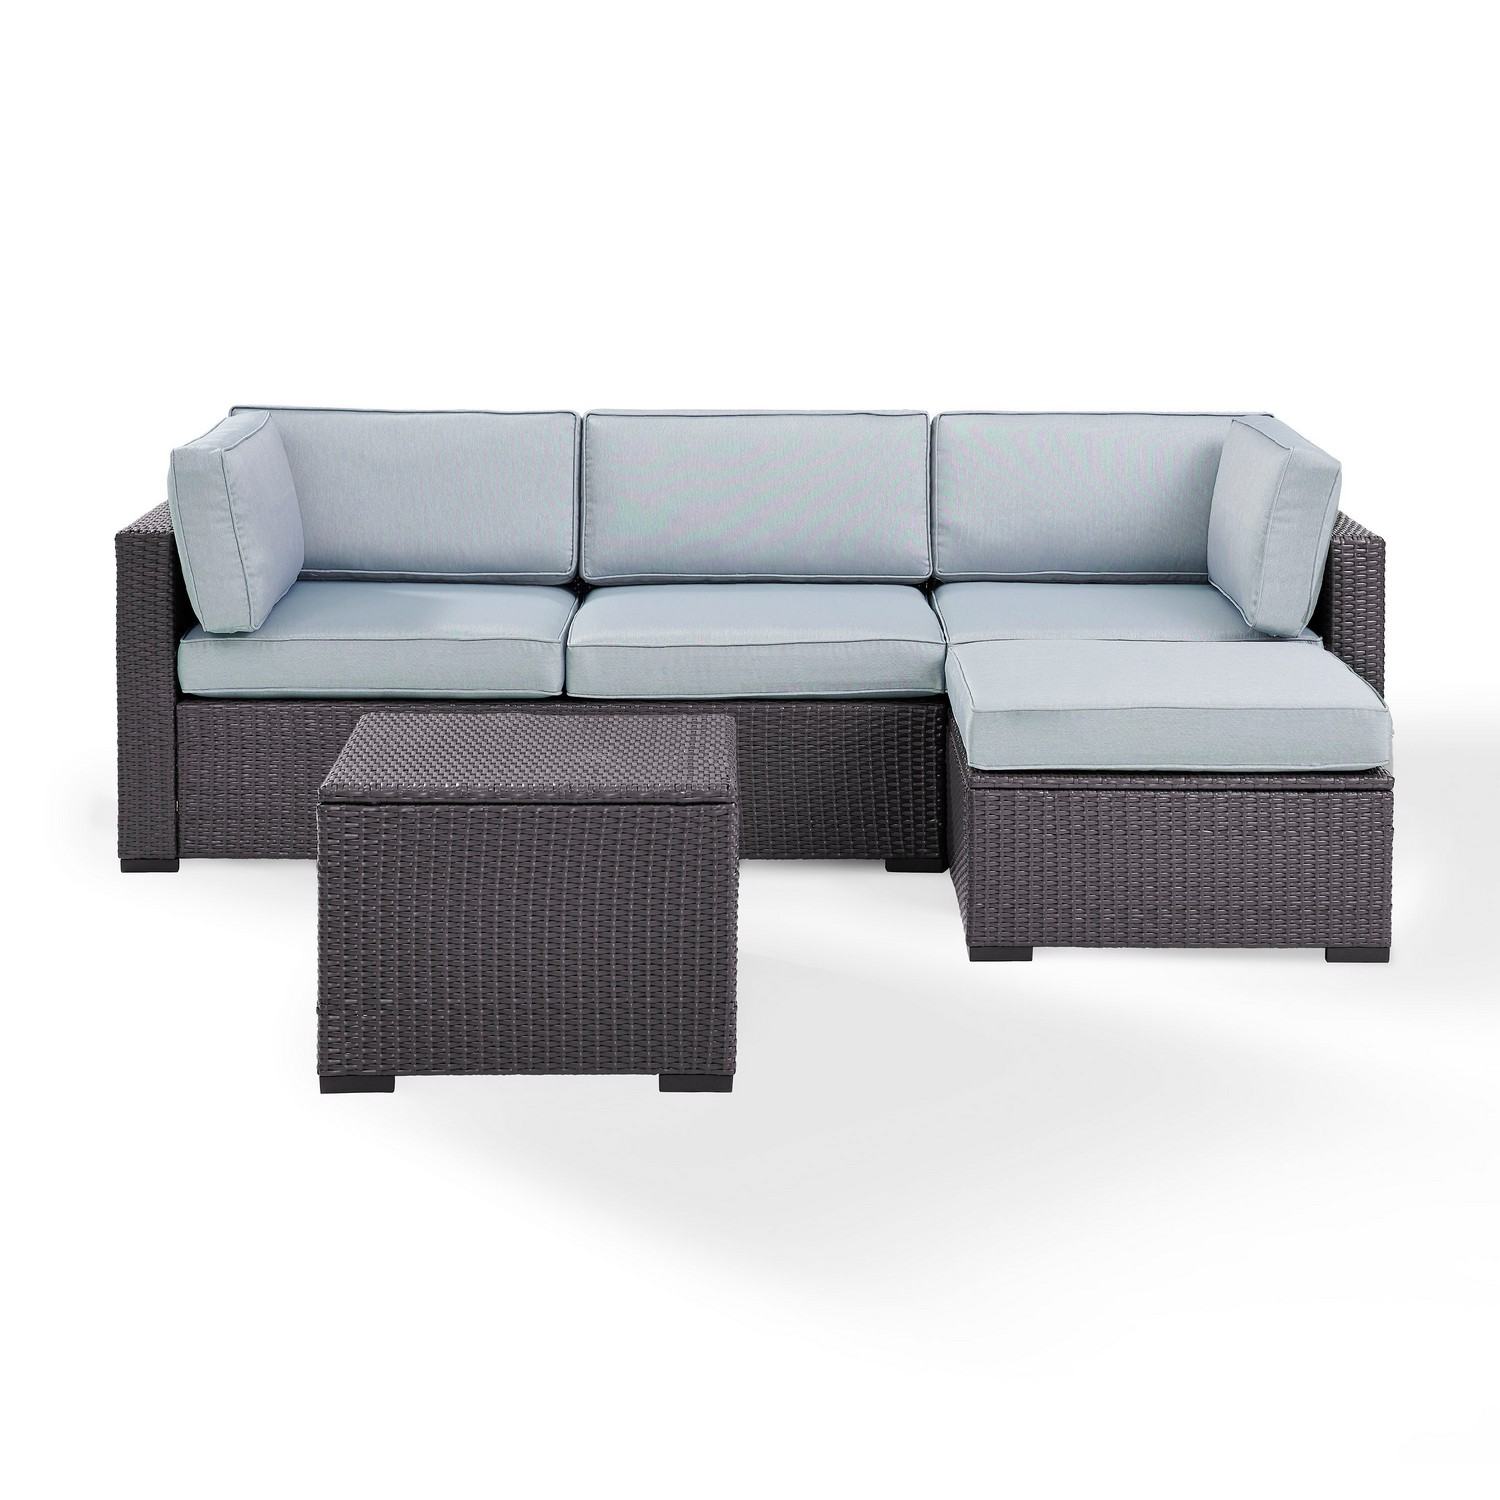 Crosley Biscayne 4-PC Outdoor Wicker Sectional Set - Loveseat, Corner Chair, Ottoman, Coffee Table - Mist/Brown